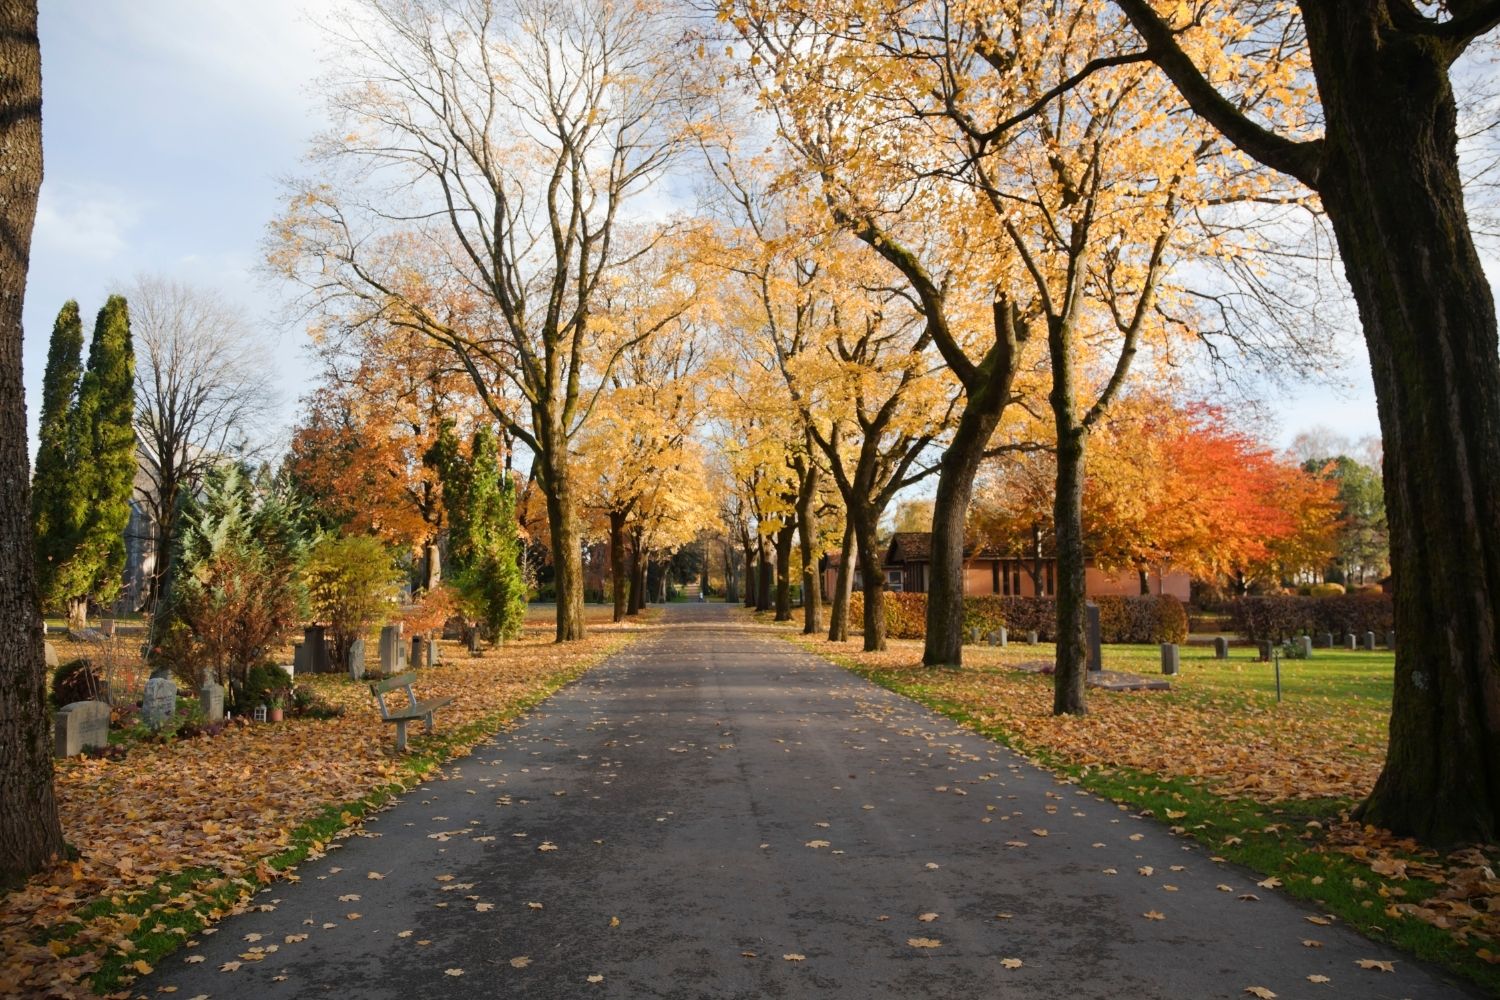 Graveyard in the fall